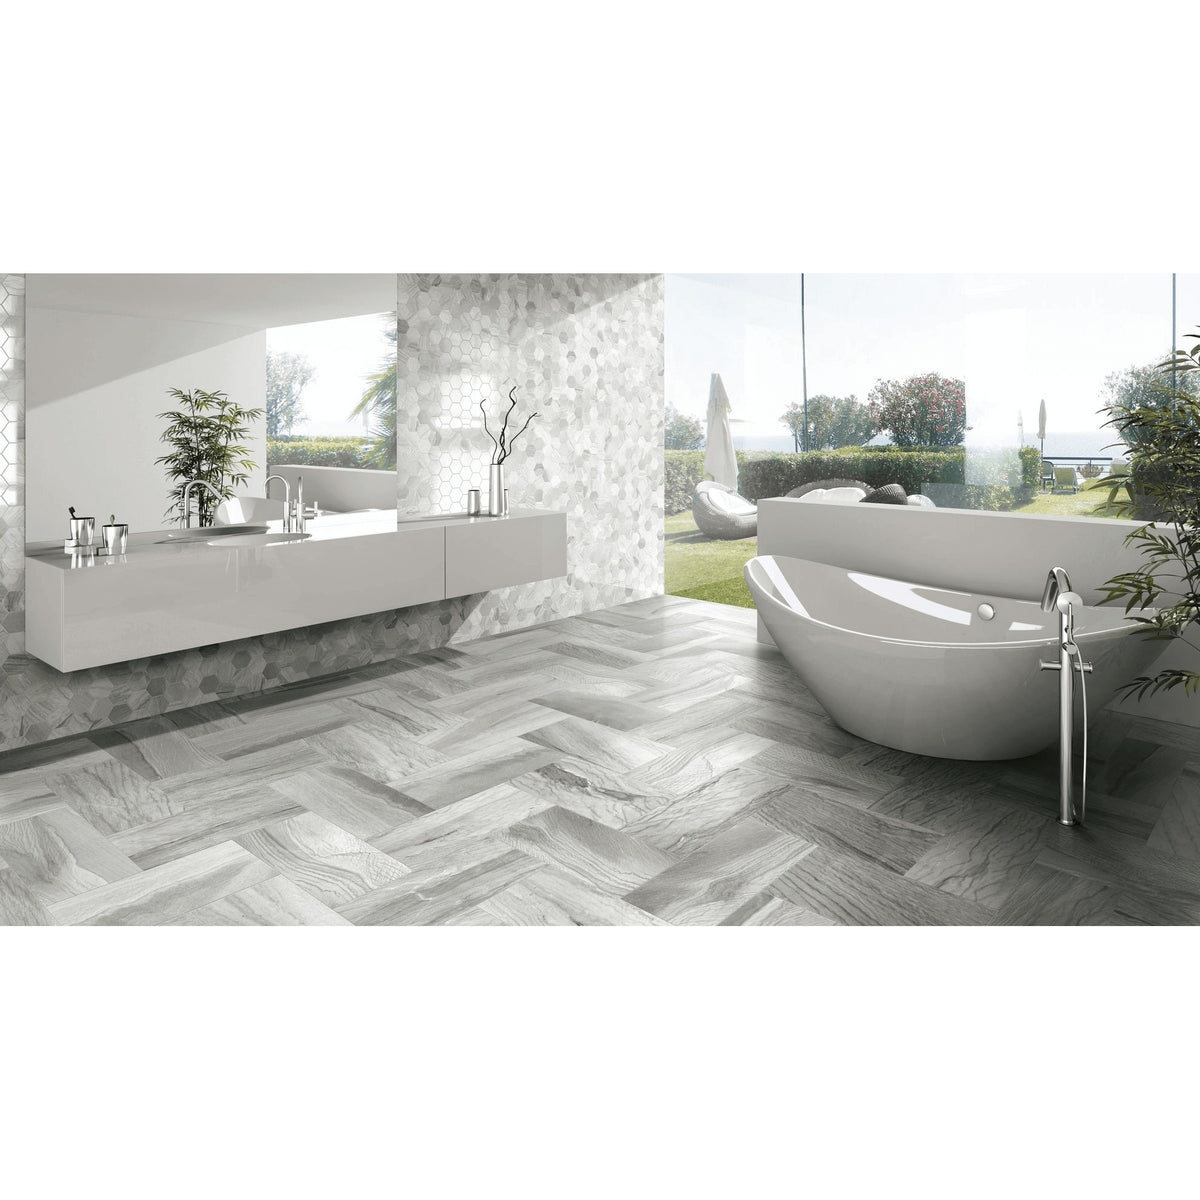 Happy Floors - Macaubas Series 12 in. x 24 in. Rectified Porcelain Tile - Oyster Polished